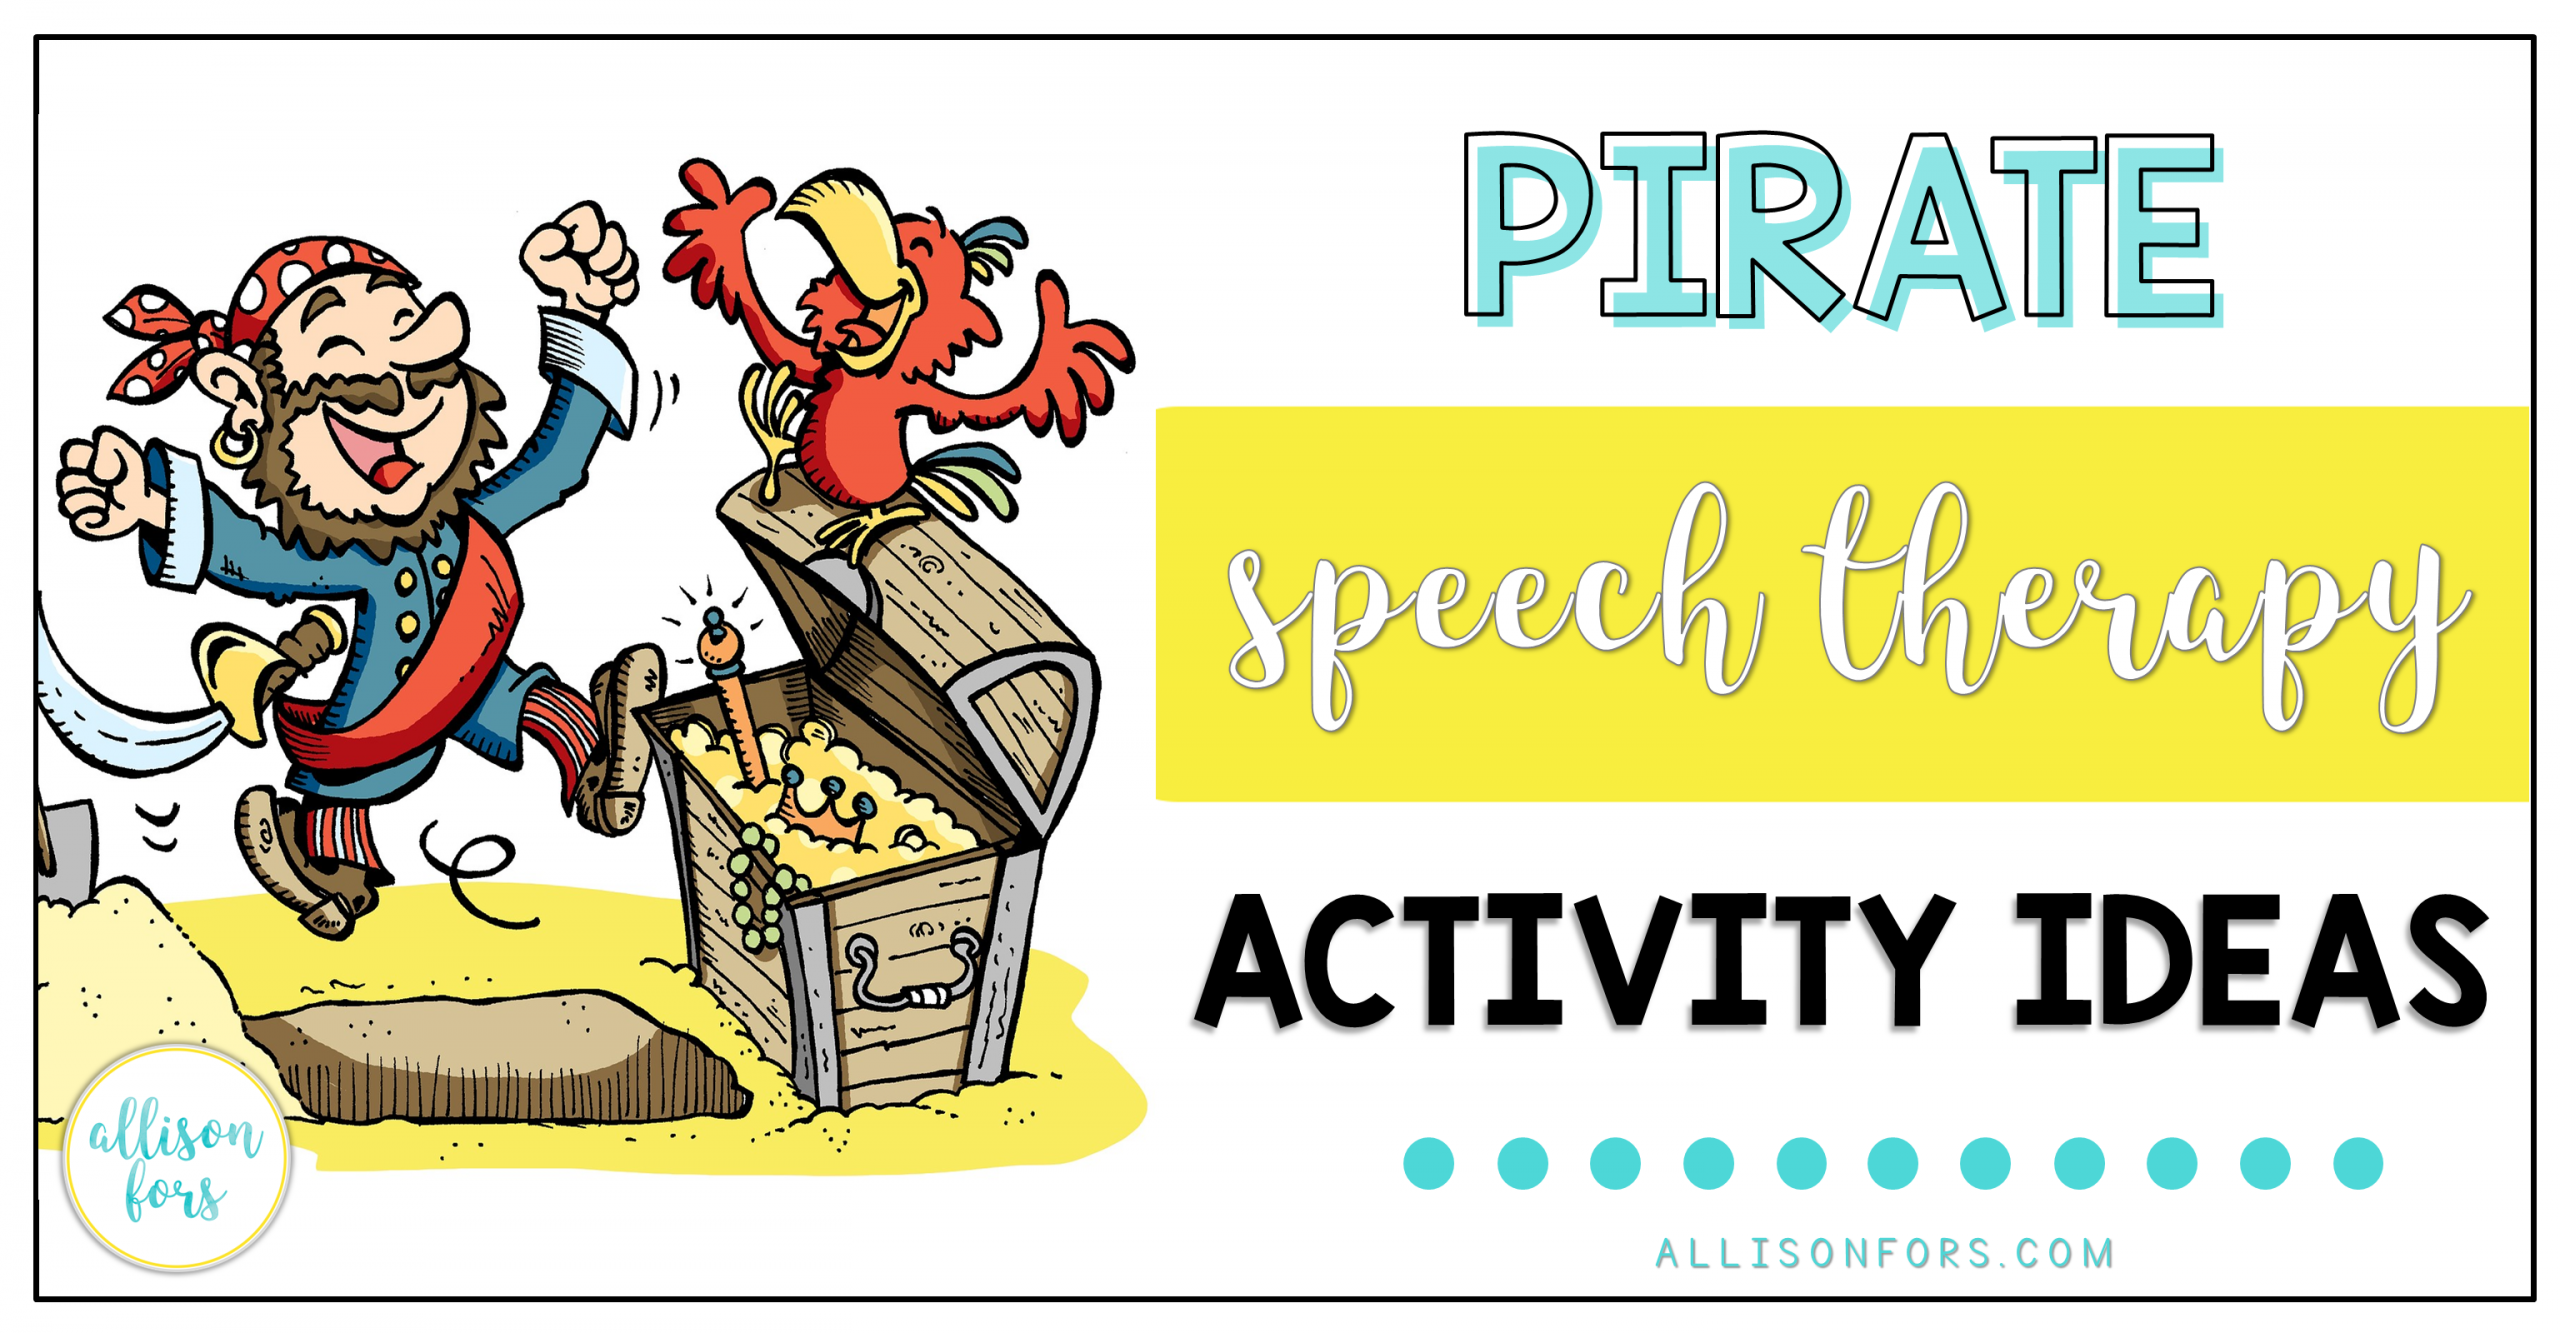 Pirate Speech Therapy Activity Ideas